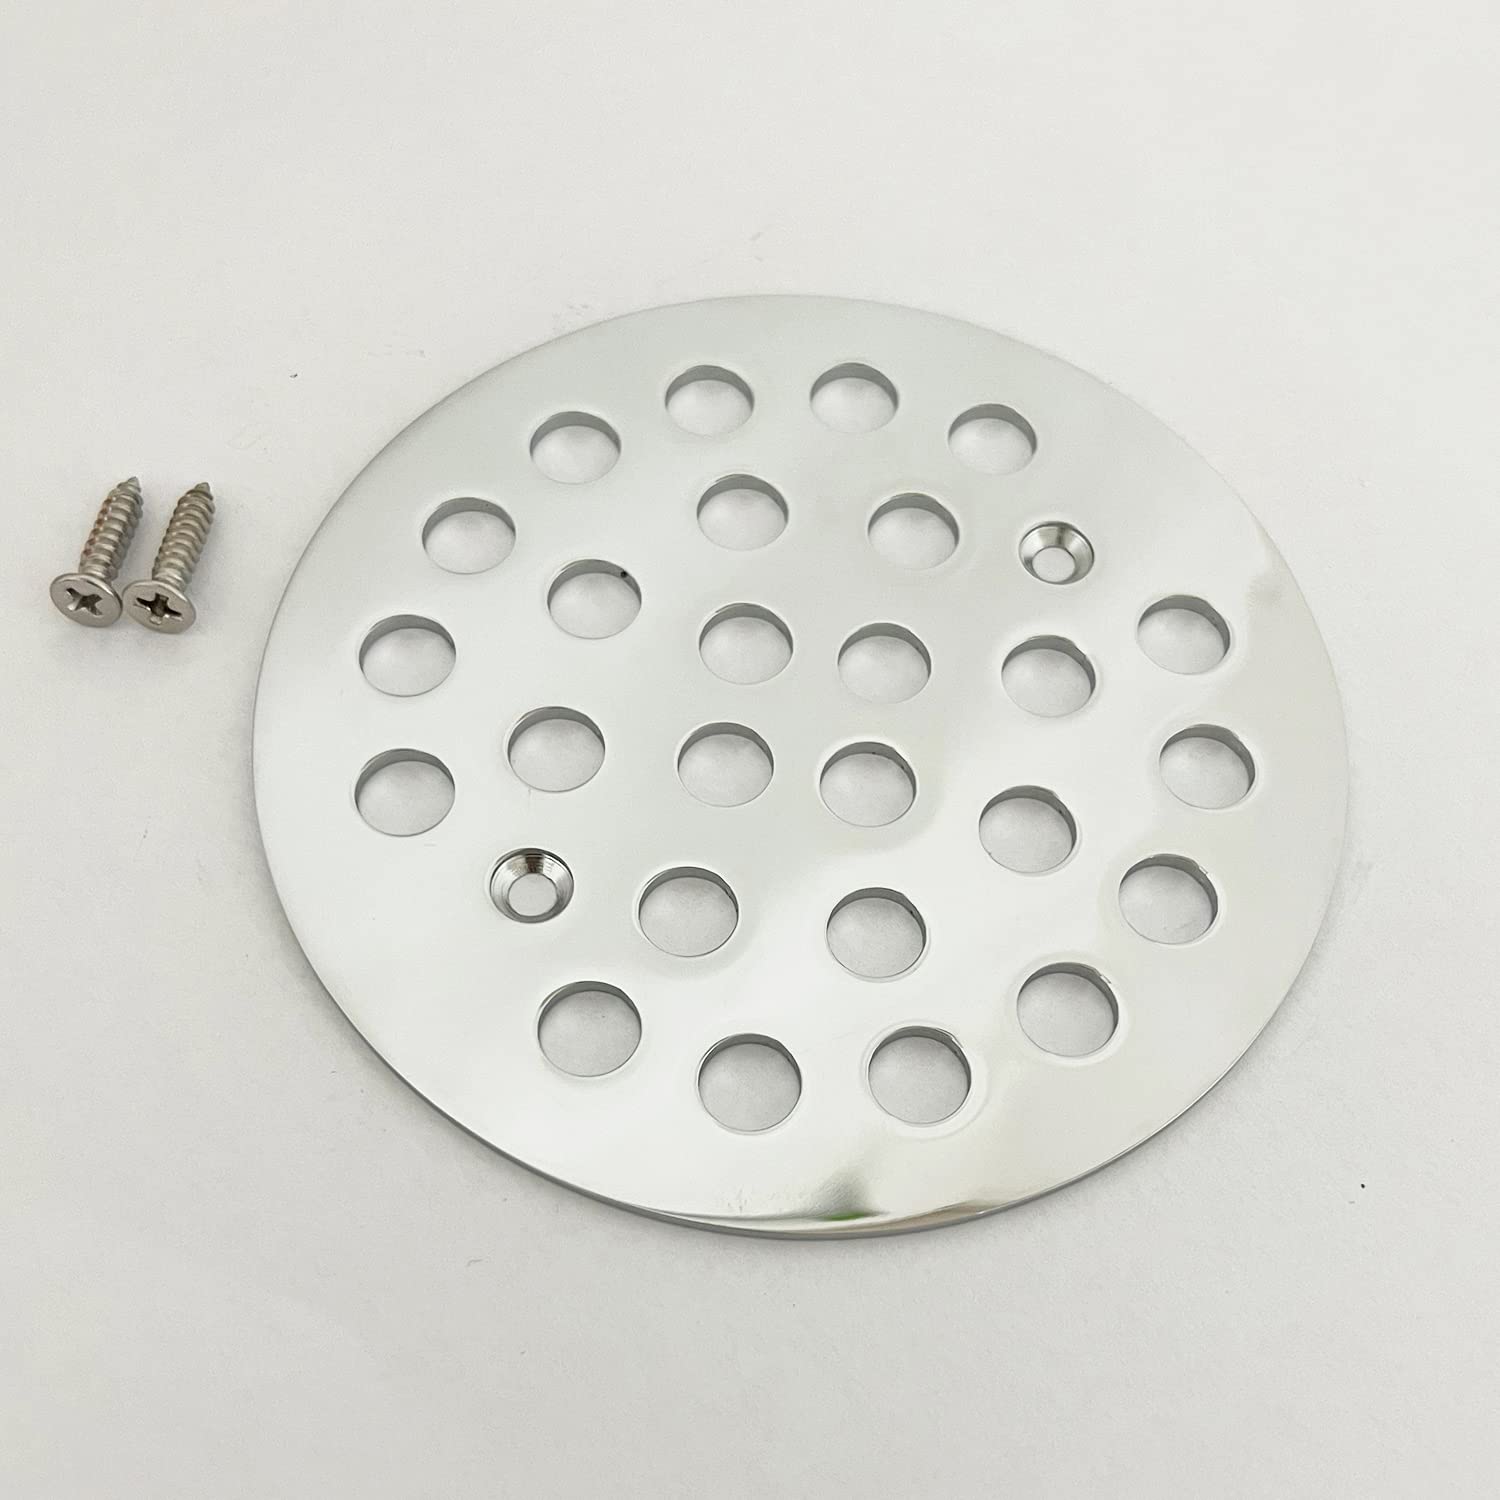 DEOKXZ 4-1/4 Inch Screw-In Round Shower Drain Cover Replacement Floor Filter, With Screws (Polished chrome)